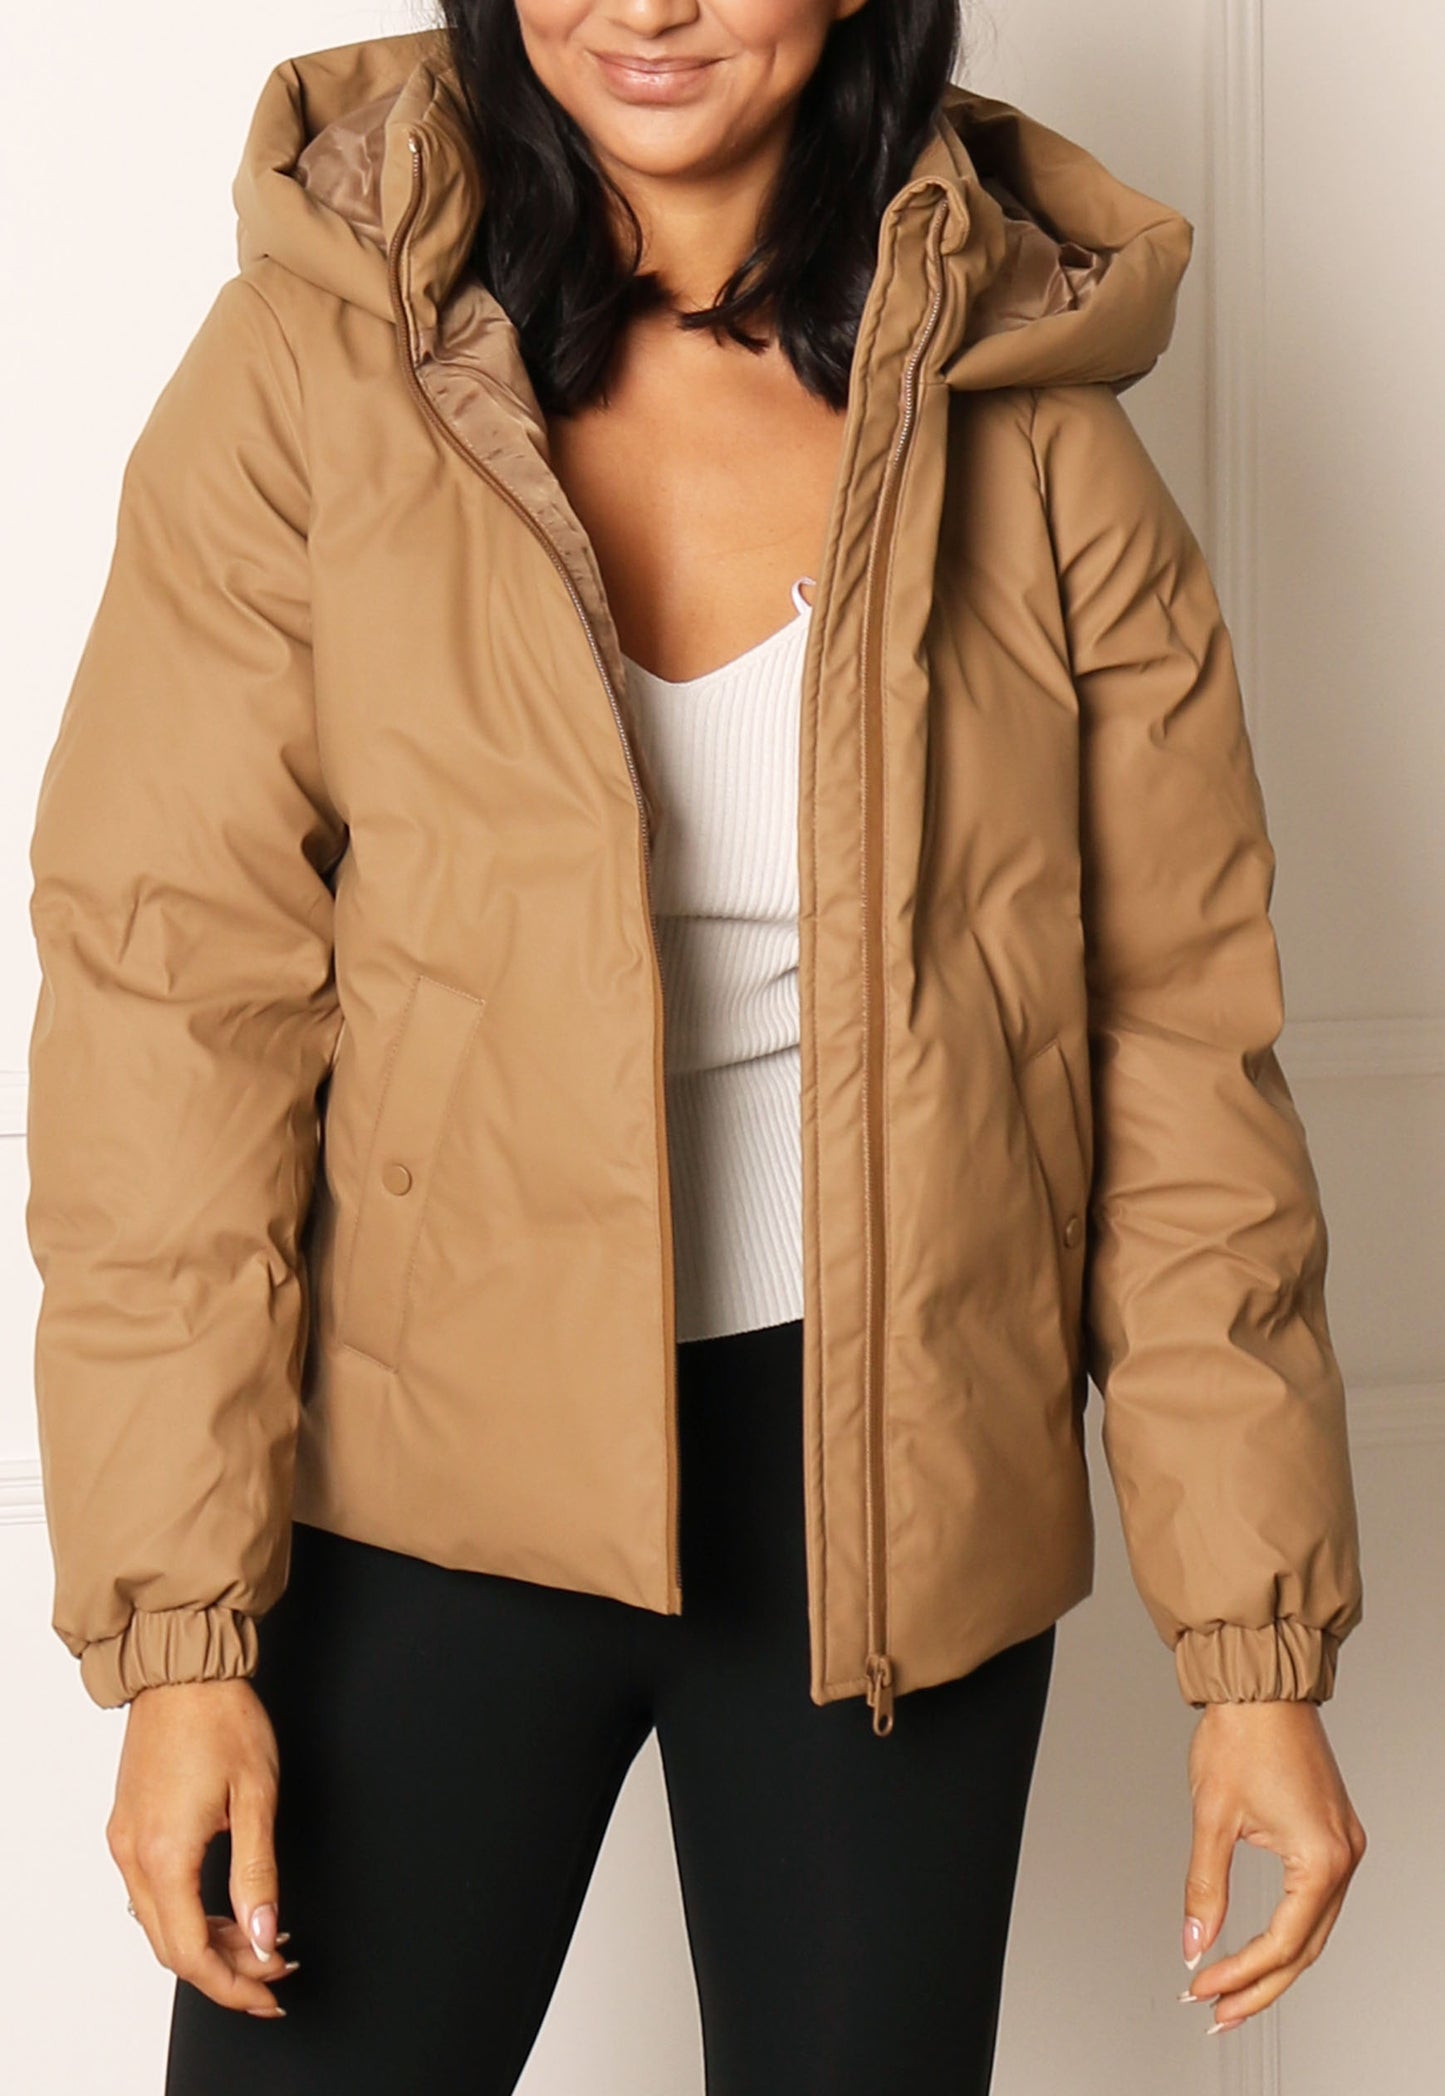 VERO MODA Noe Water Repellent Quilted Short Hooded Puffer Jacket in Soft Tan - concretebartops